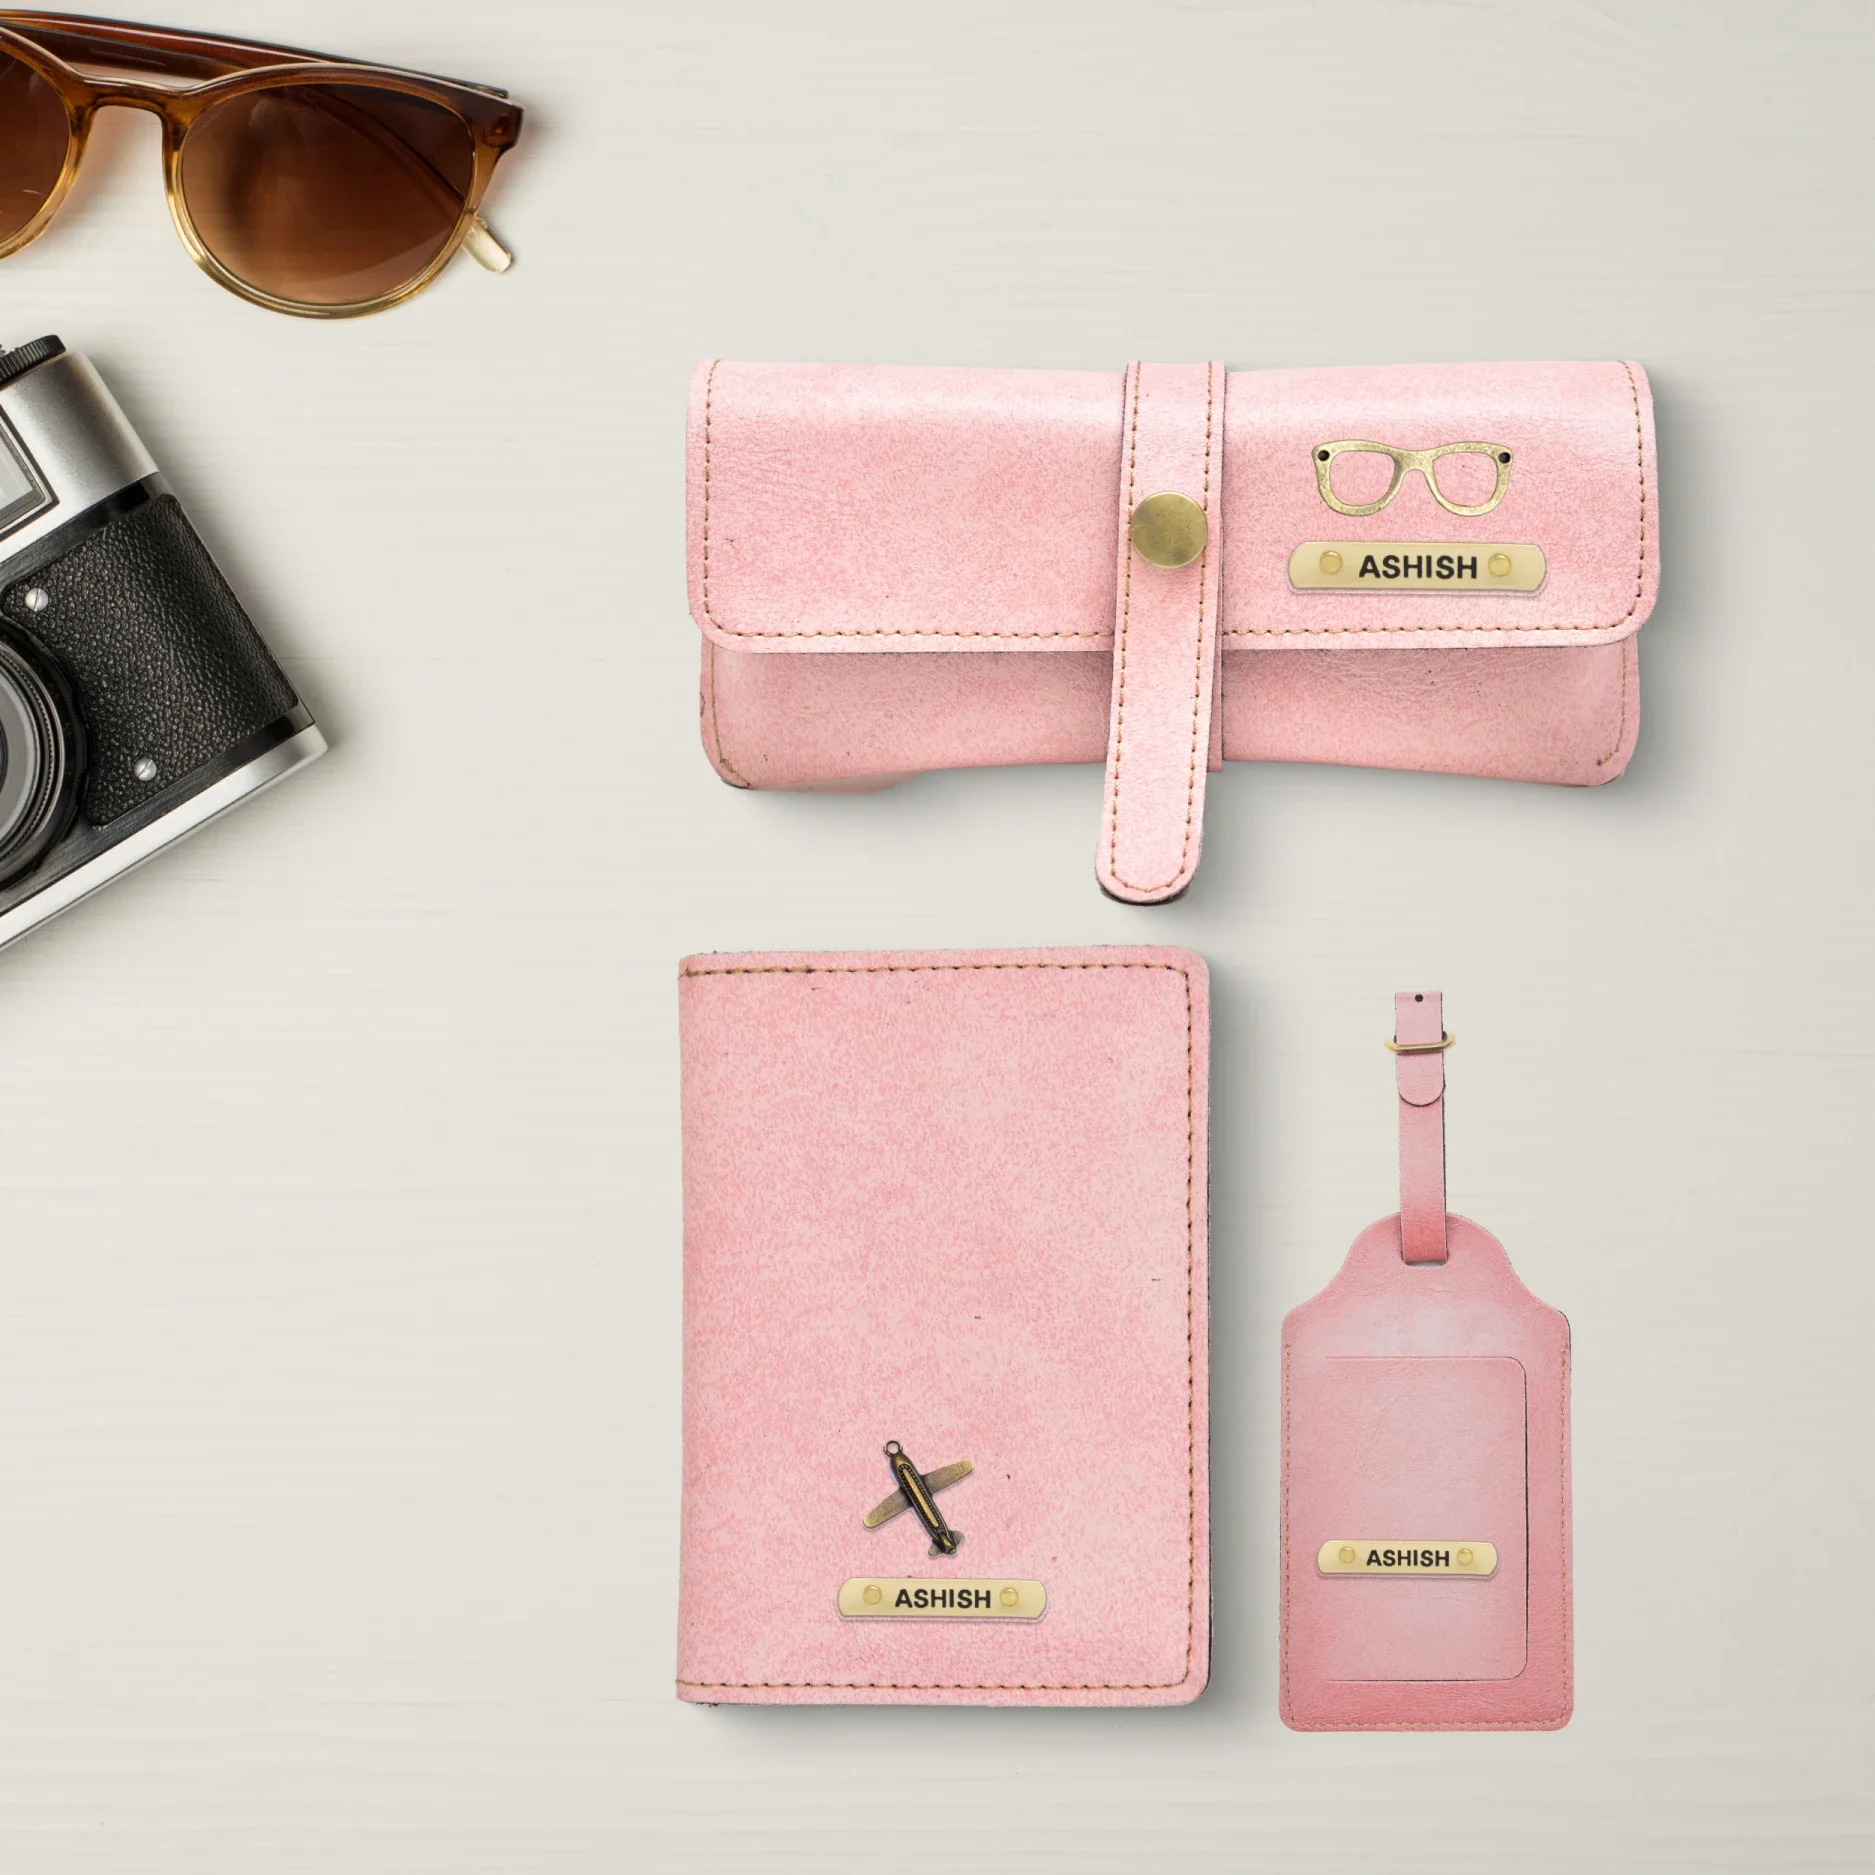 Travel with ease and style with our custom traveler combo. This set includes a personalized passport cover, leather eyewear case, and luggage tag